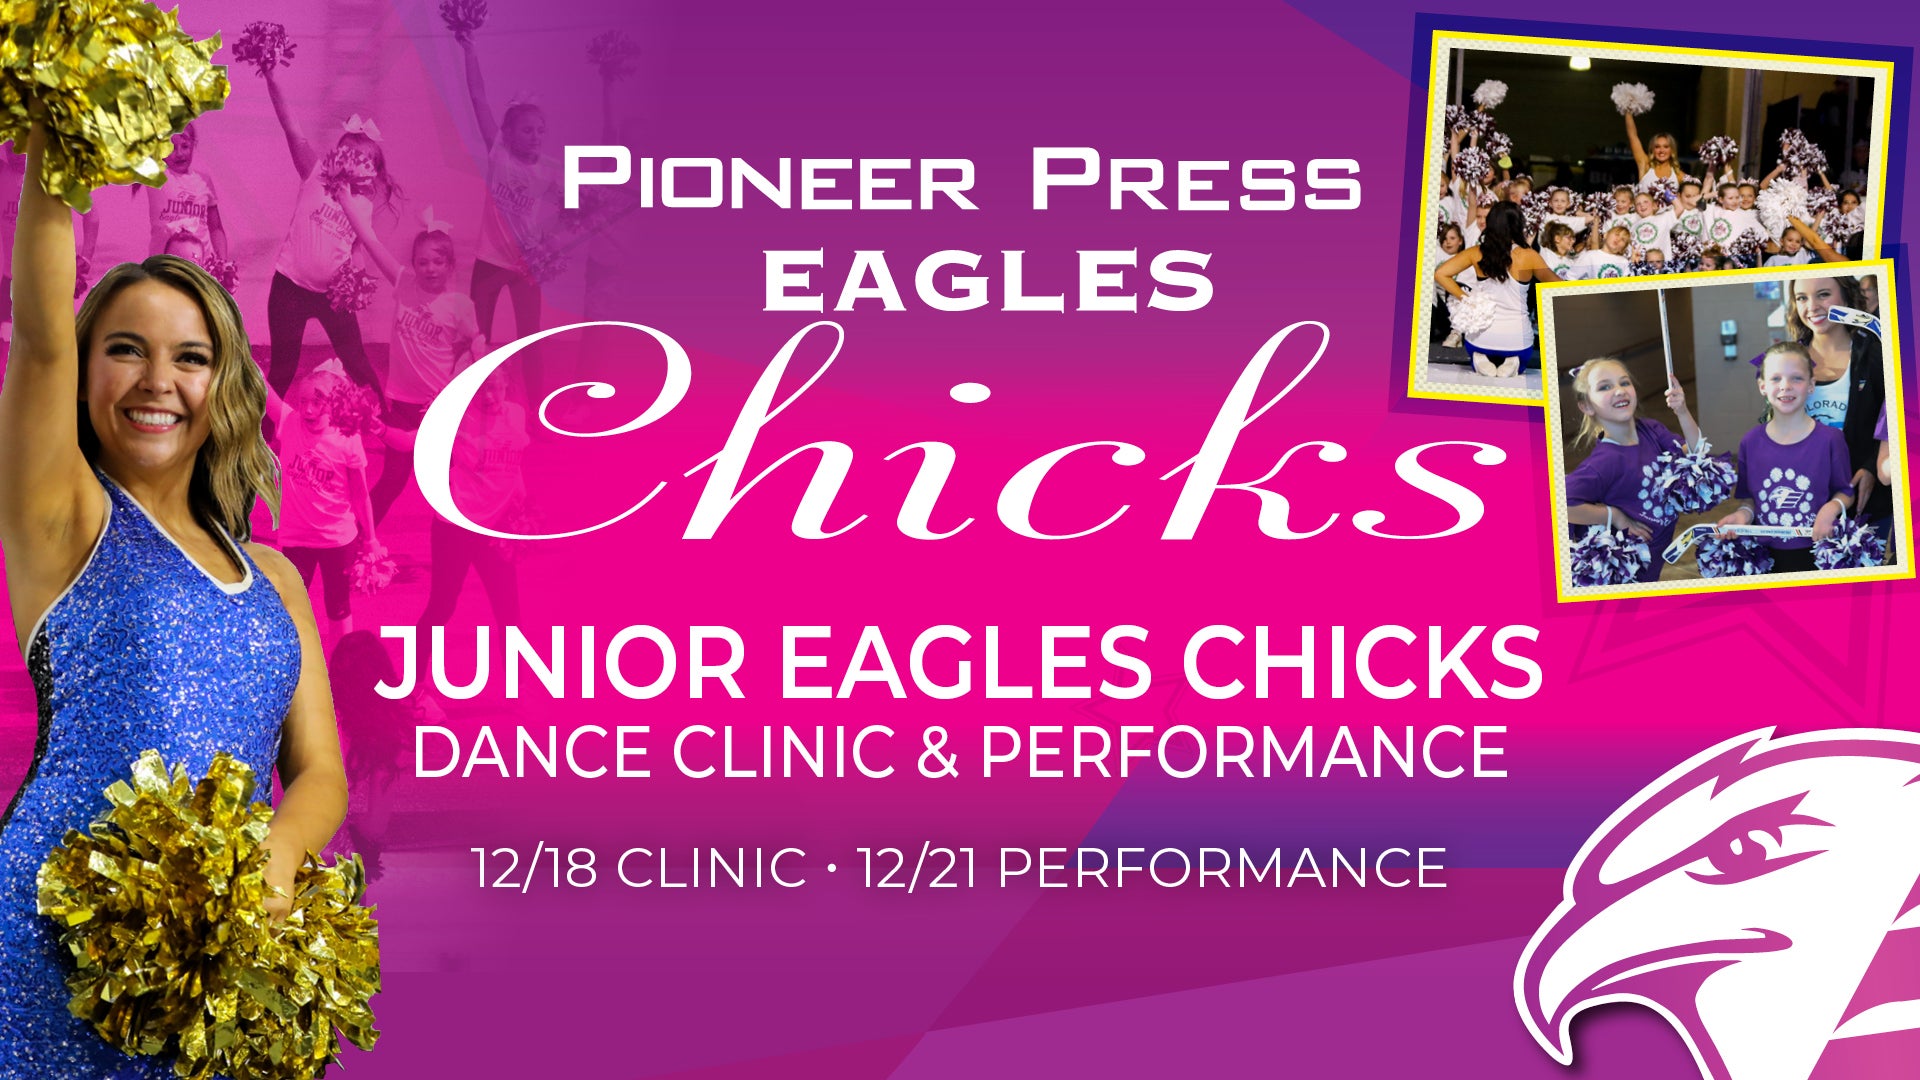 Sign up for the Junior Chicks Today!